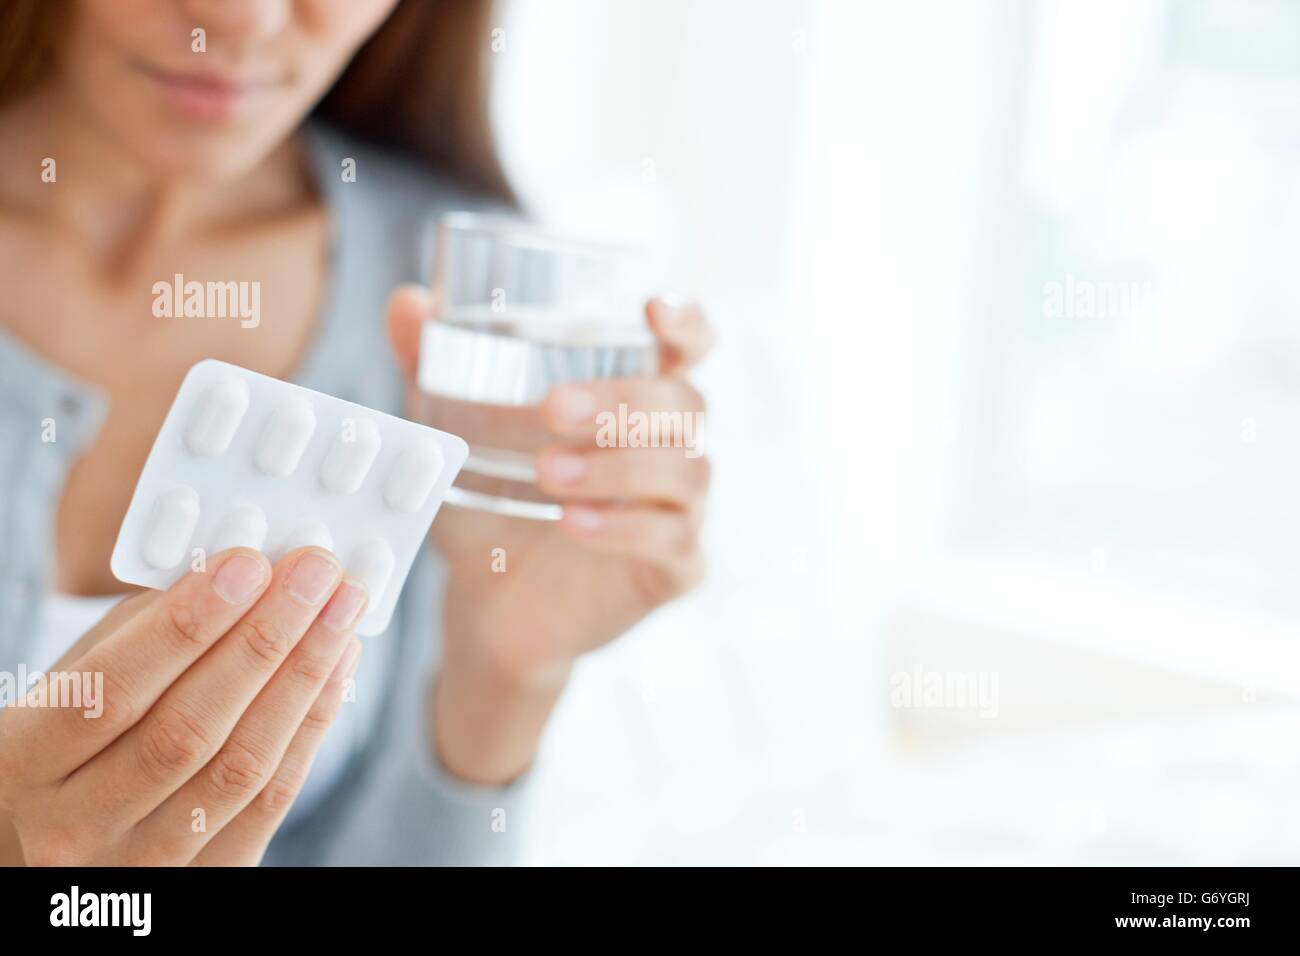 MODEL RELEASED. Young woman holding blister pack. Stock Photo